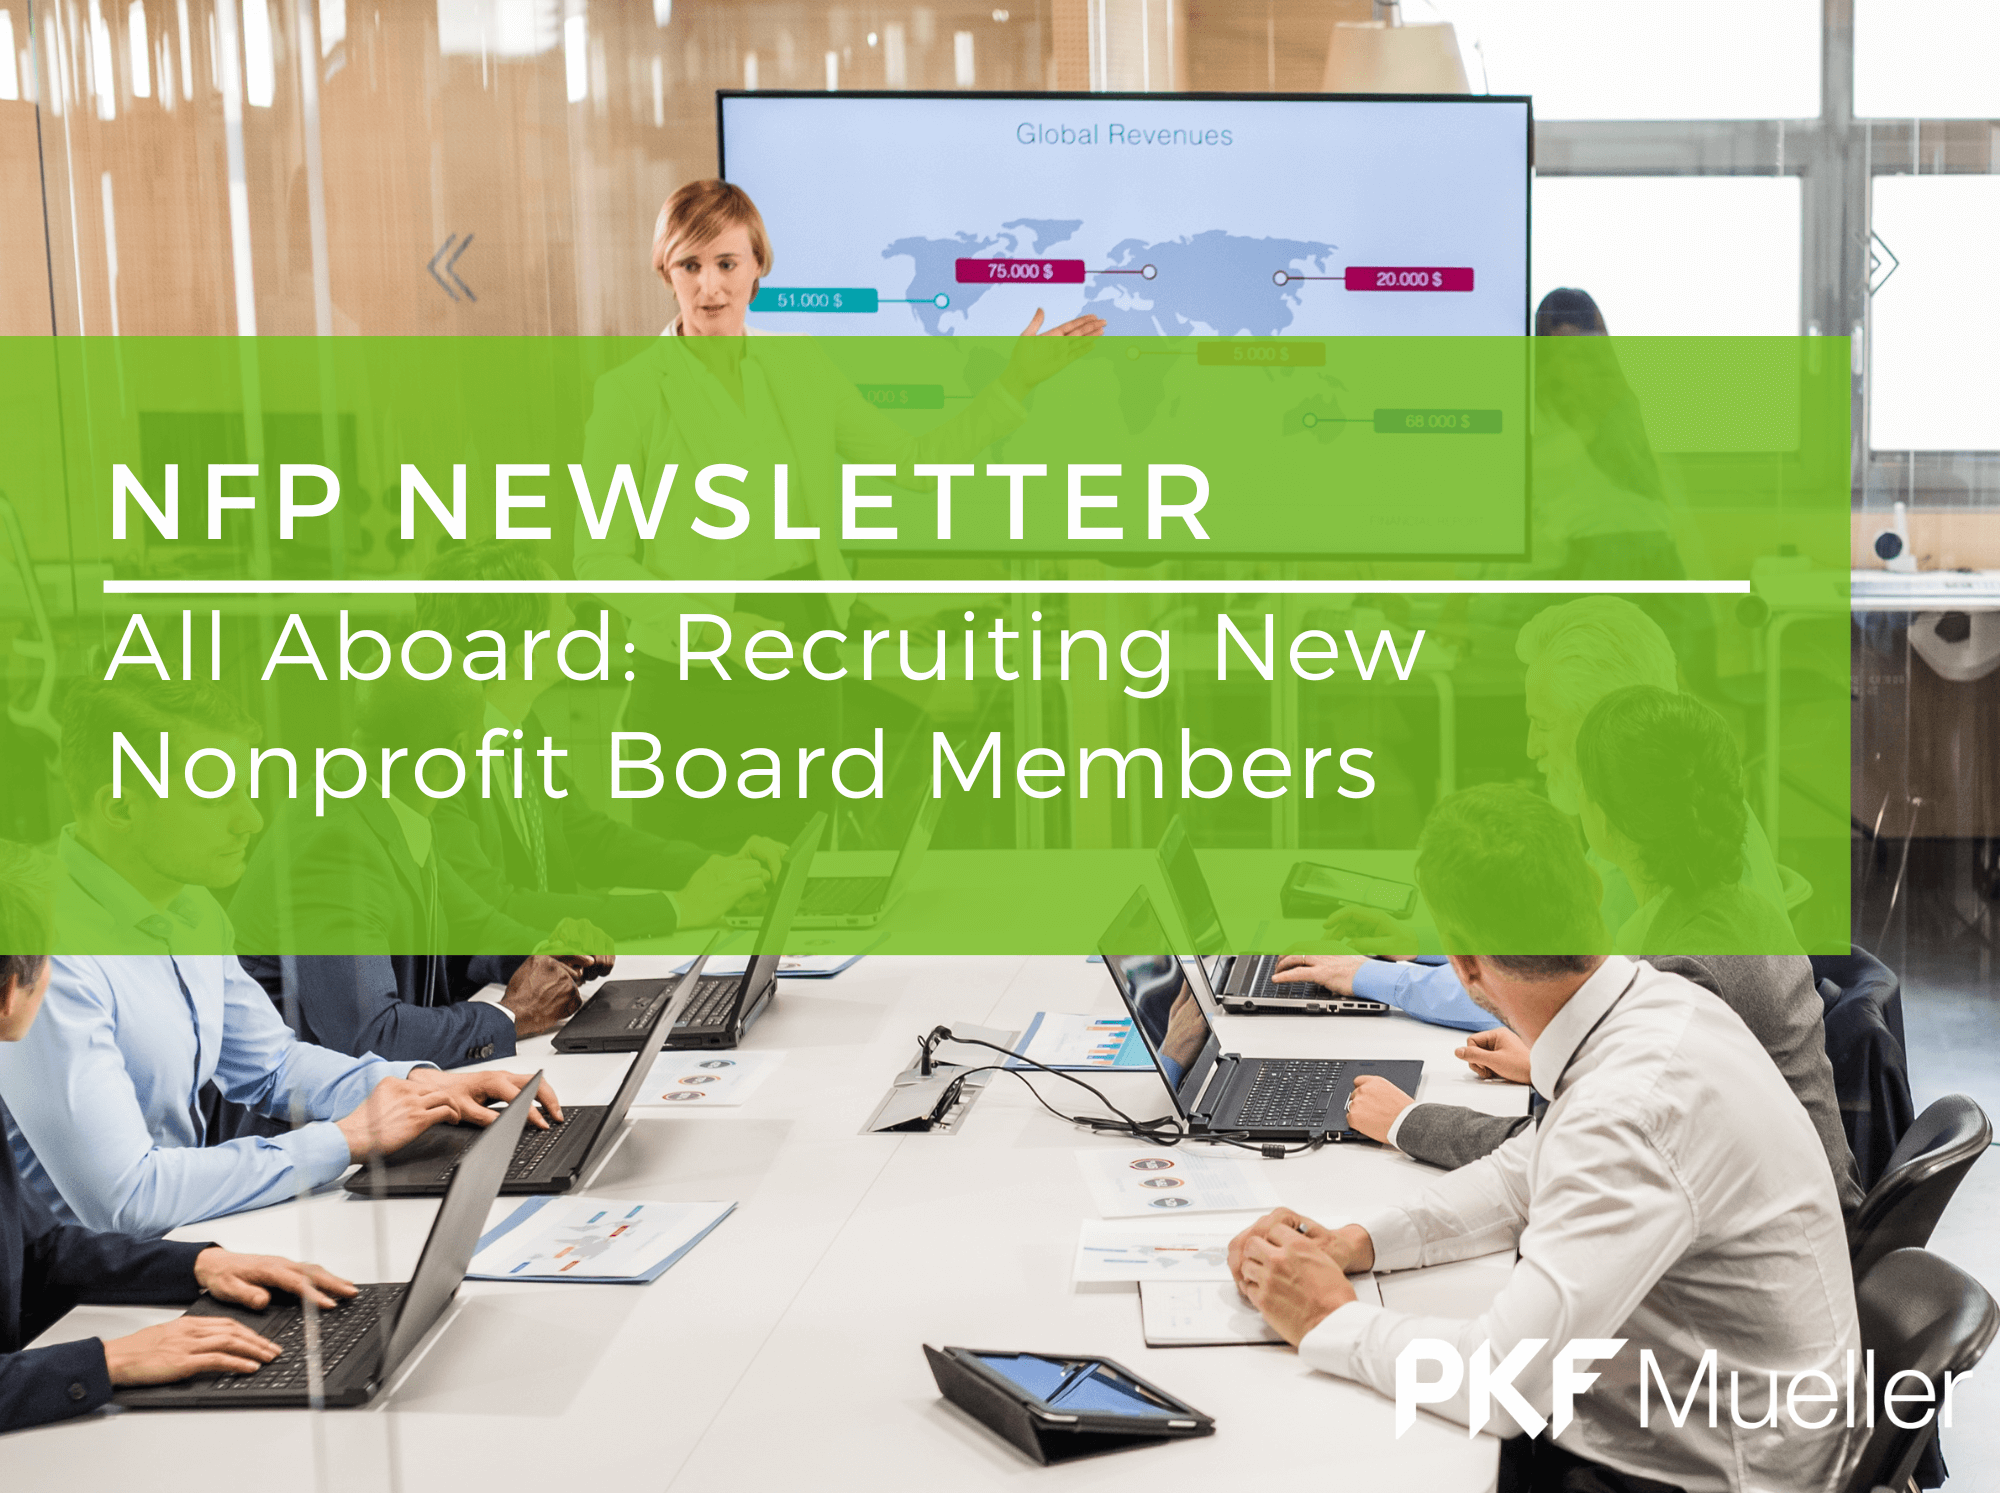 All Aboard: Recruiting New Nonprofit Board Members